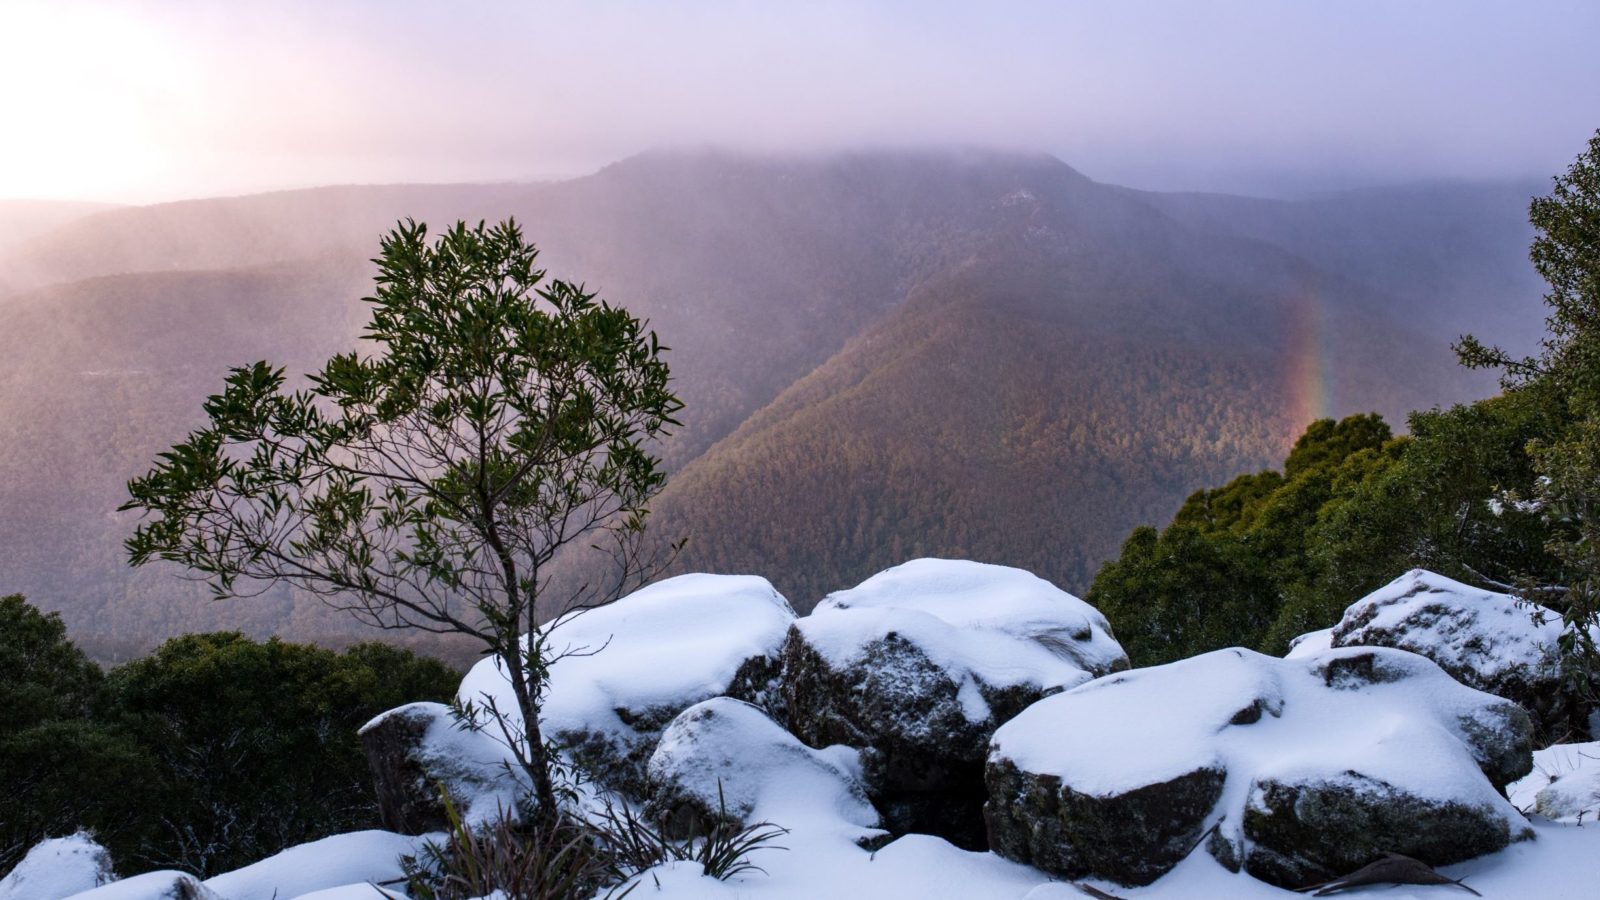 Barrington Tops receives frequent dustings of snow in the winter months